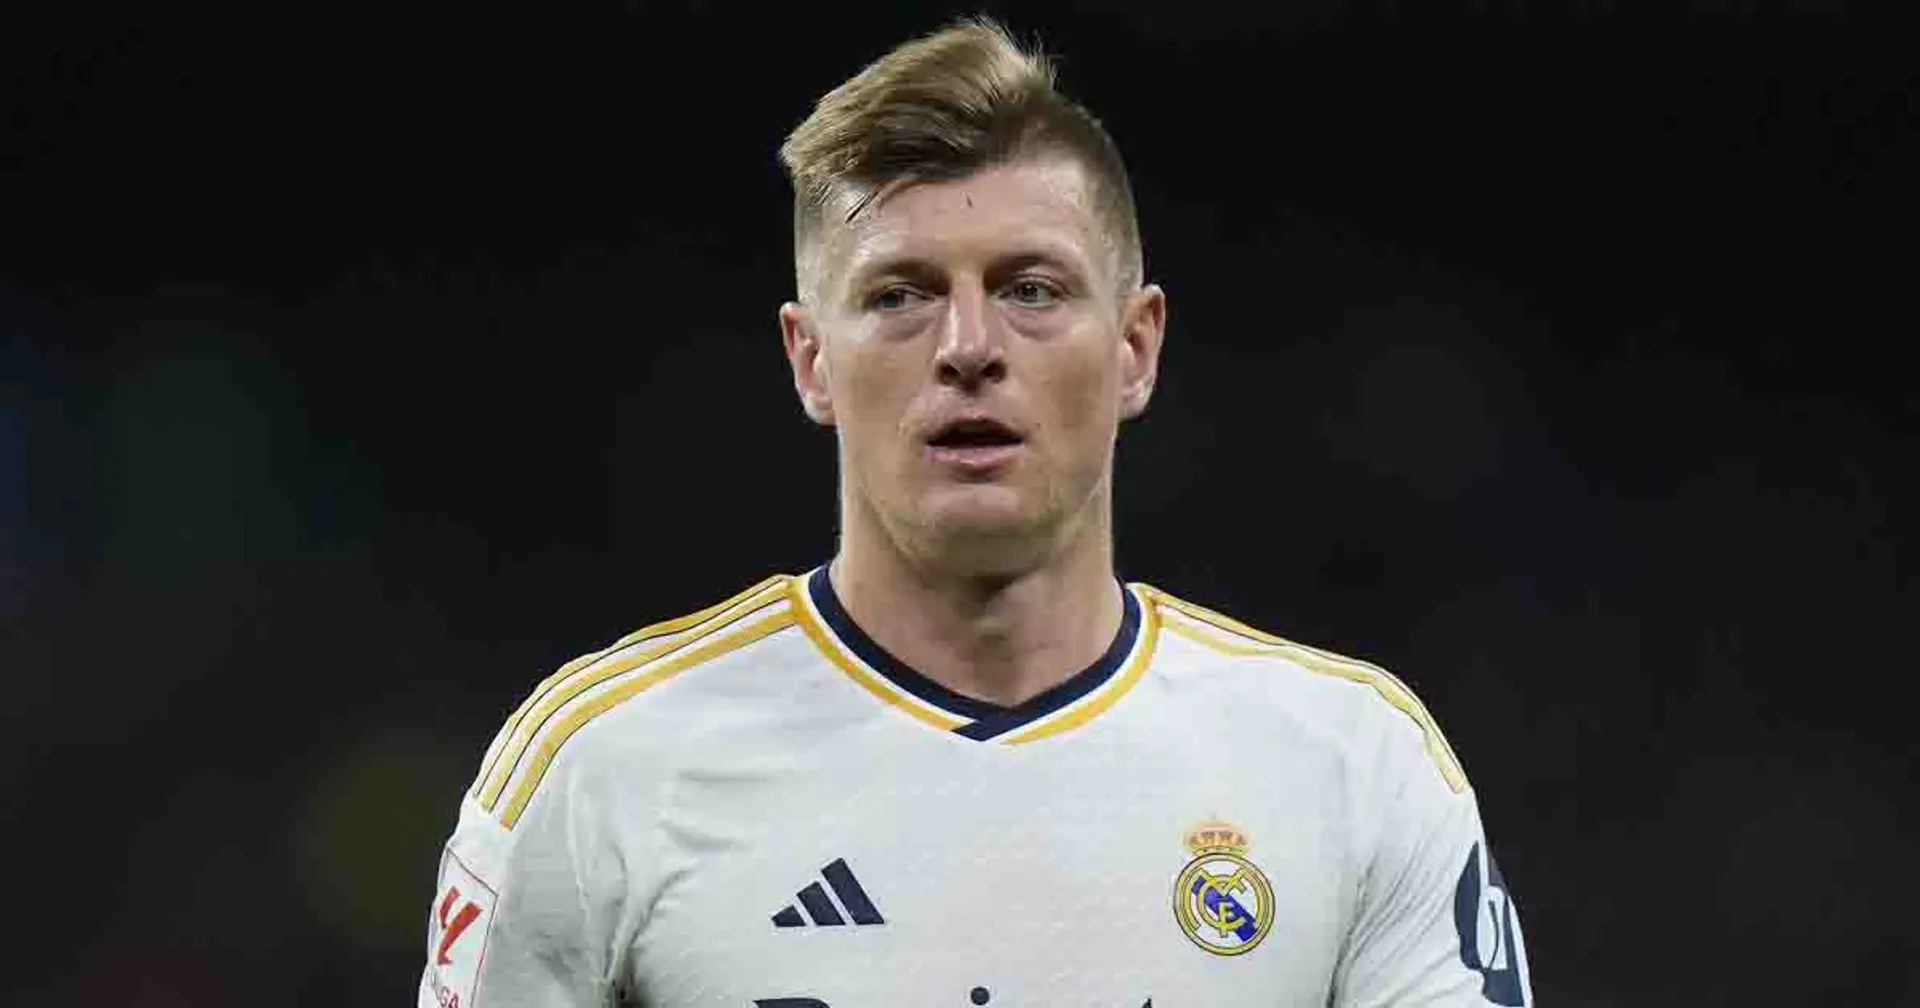 Real Madrid give Kroos lucrative condition over new contract extension – The Athletic